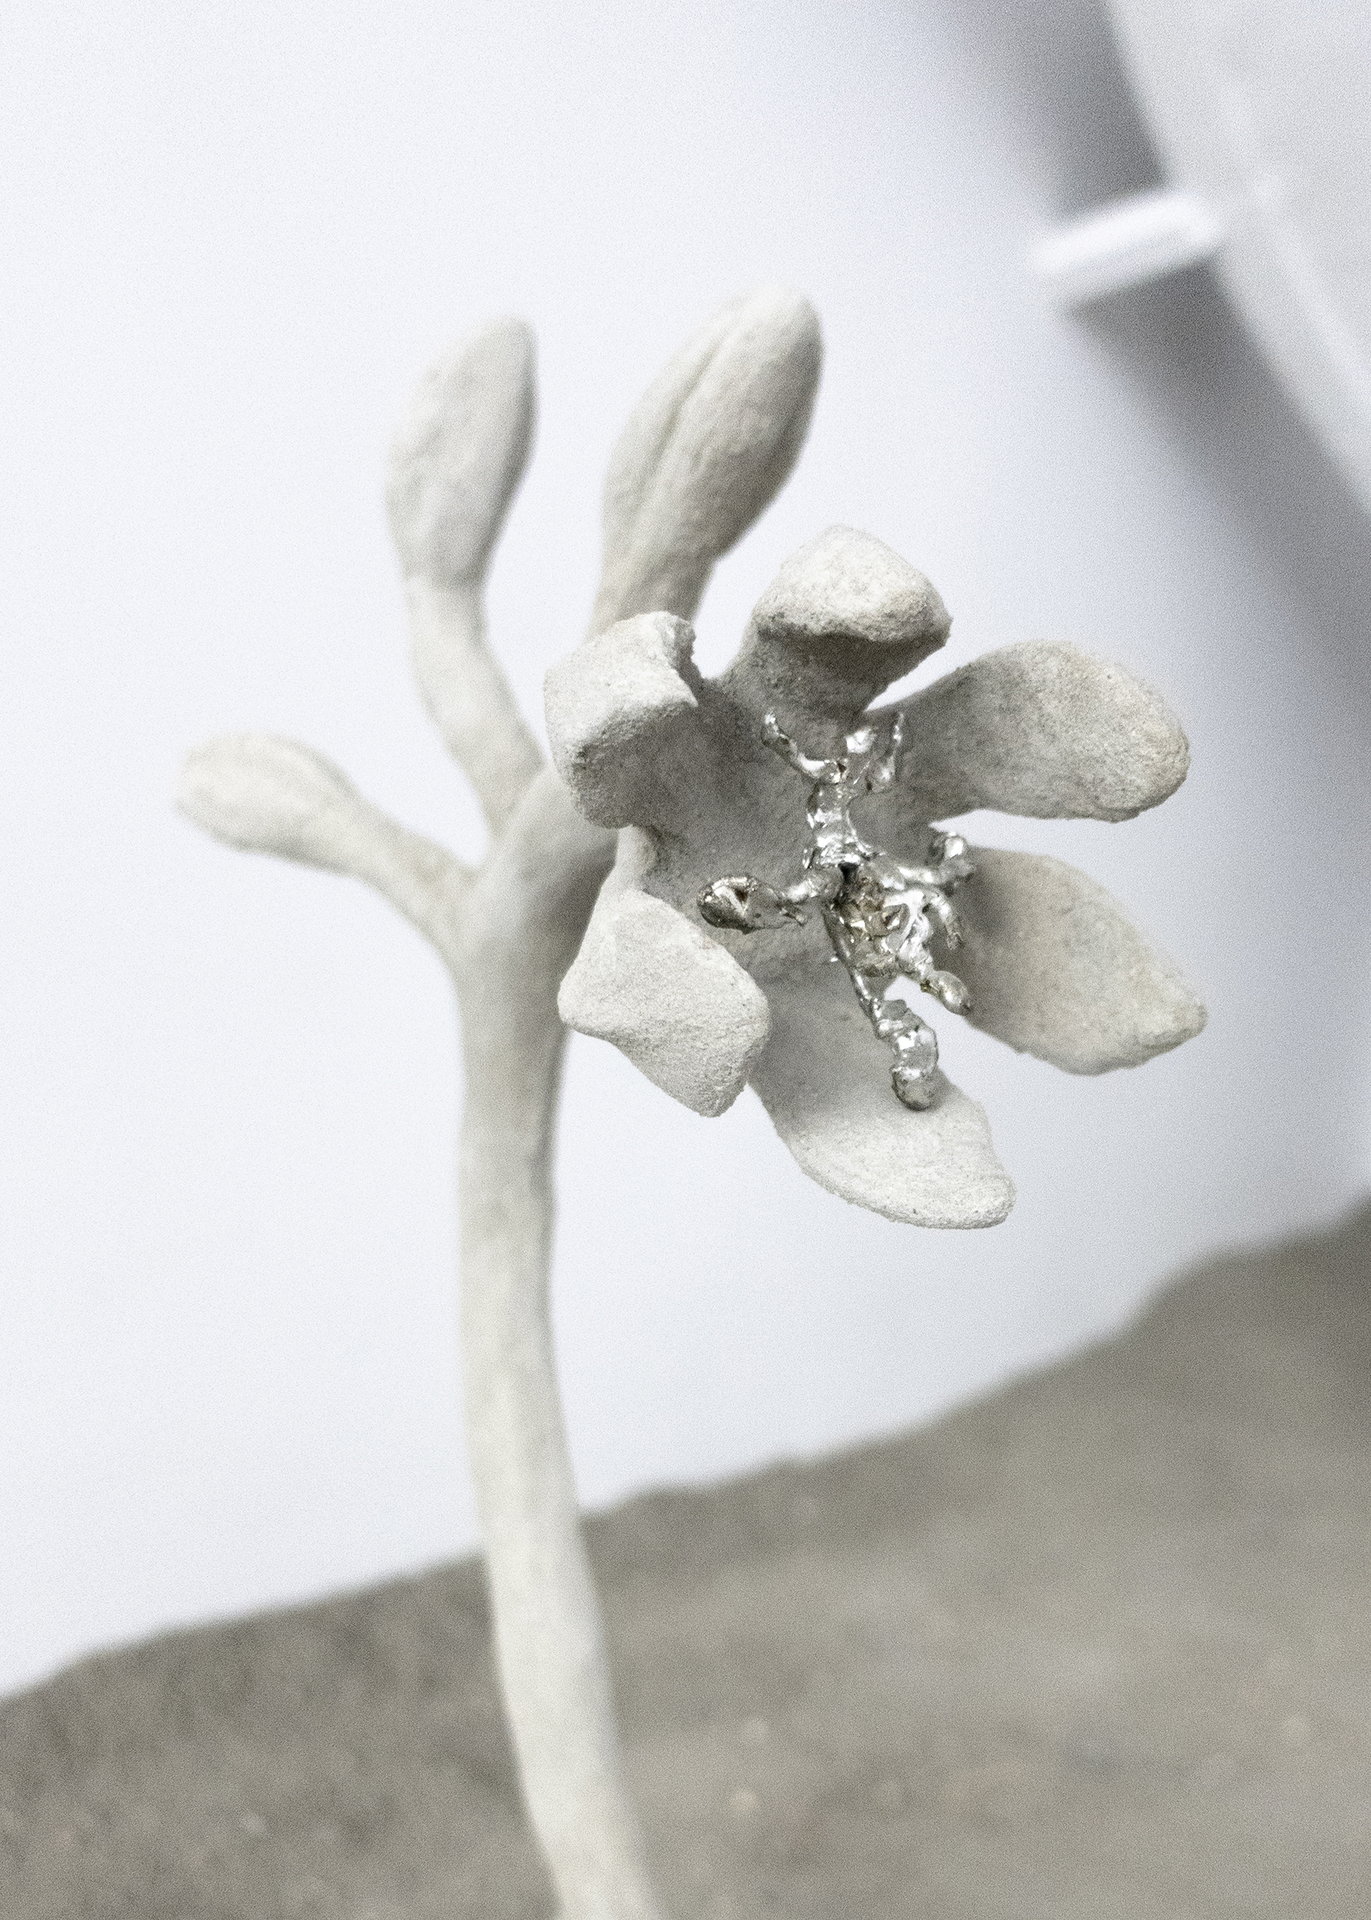 Sprouting Flower, 2021, detail, concrete, steel, tin, 30 x 46 x 50, Xolo Cuintle (Romy Texier and Valentin Vie Binet)